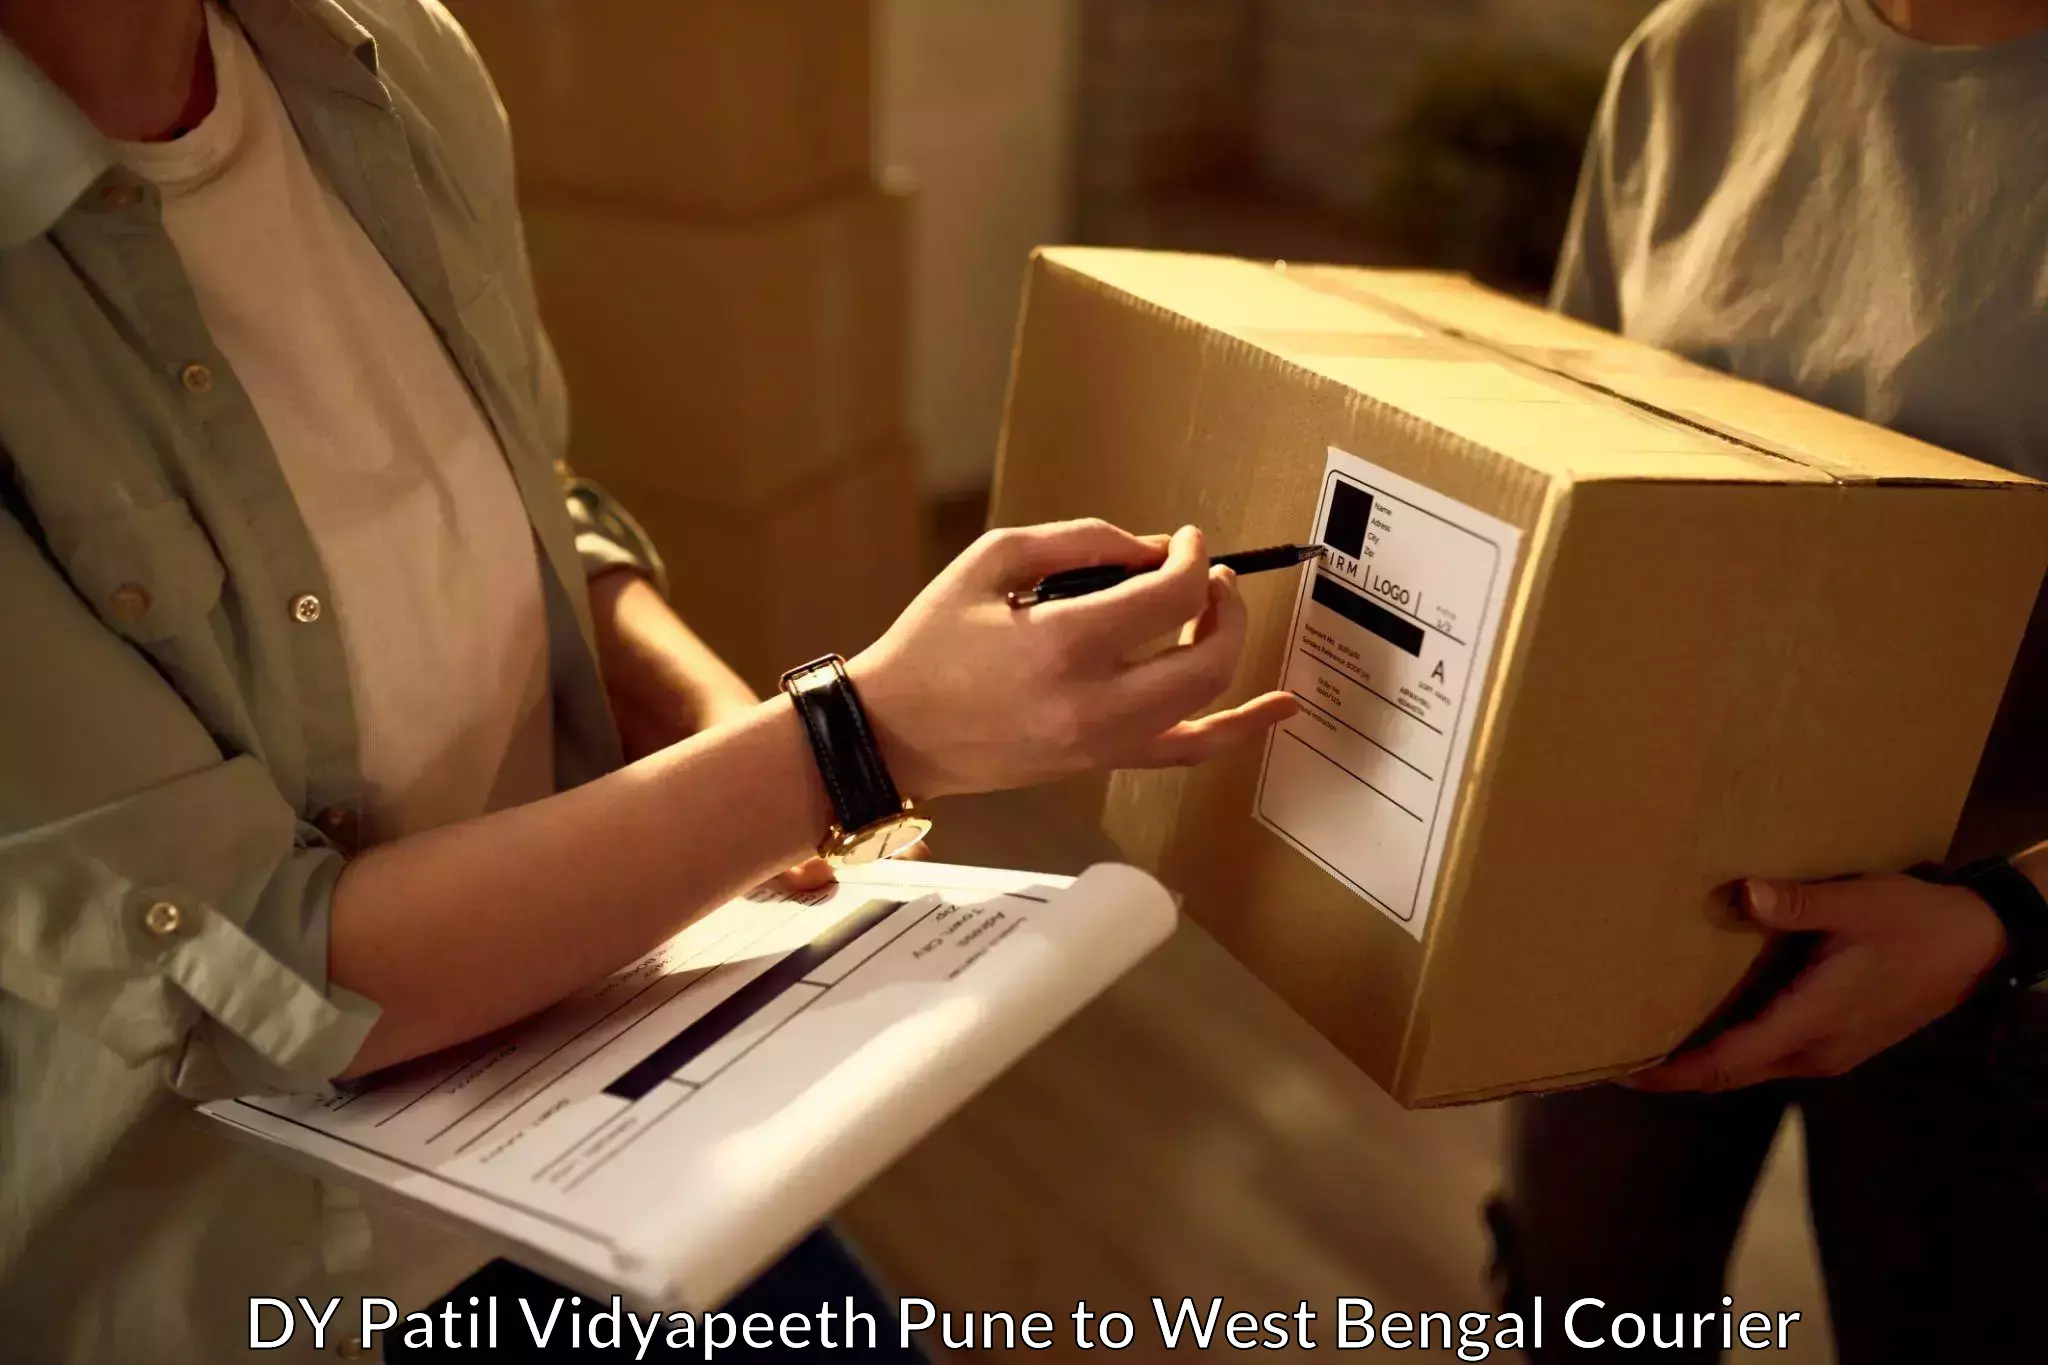 On-call courier service DY Patil Vidyapeeth Pune to Jamuria